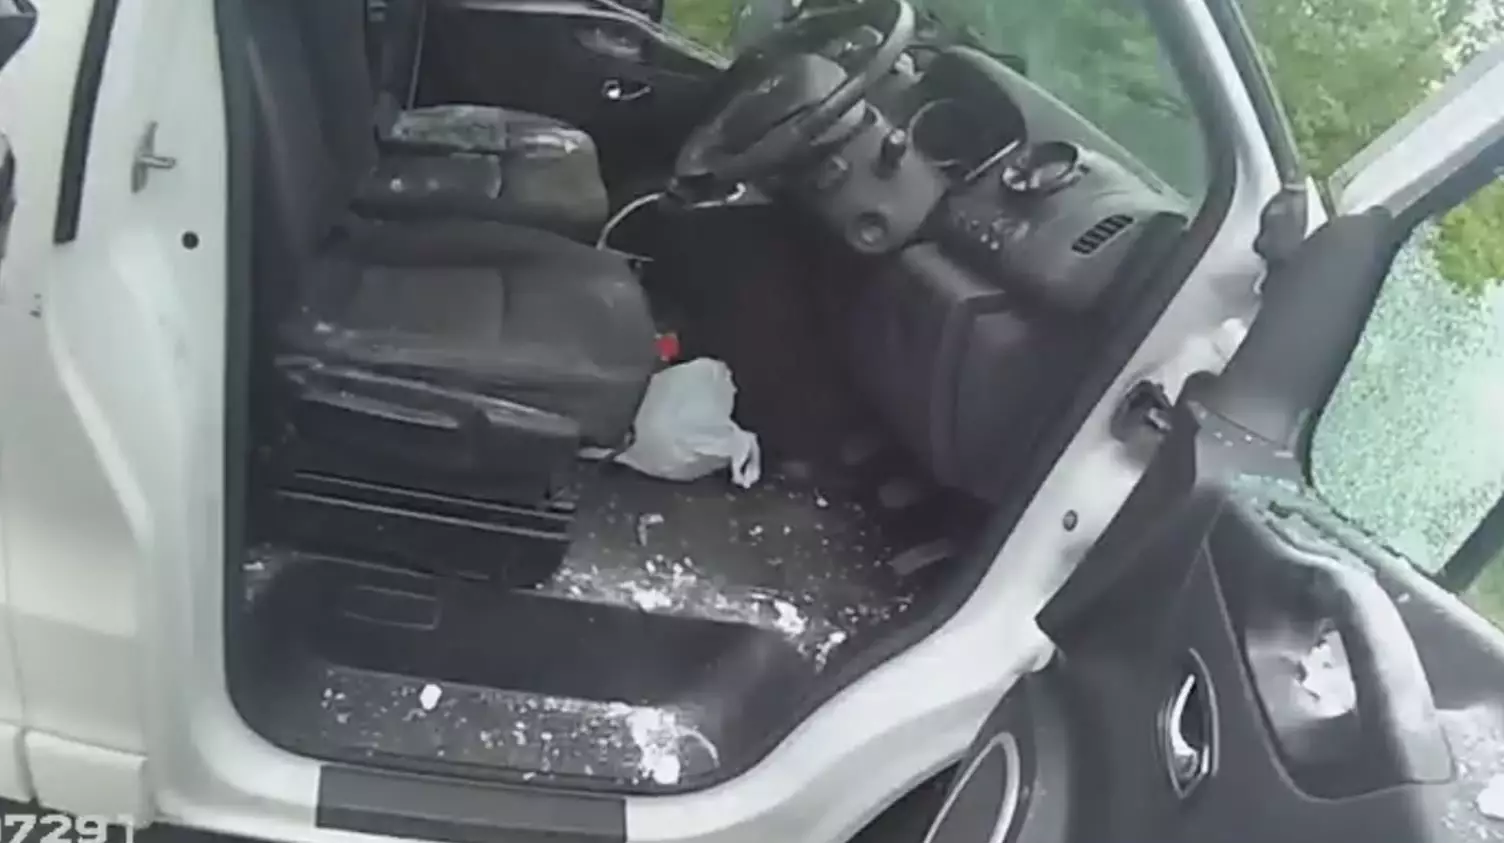 Motorist Attempts To Throw Big Bag Of Cocaine Out Of Van Window, Forgets To Open Window 